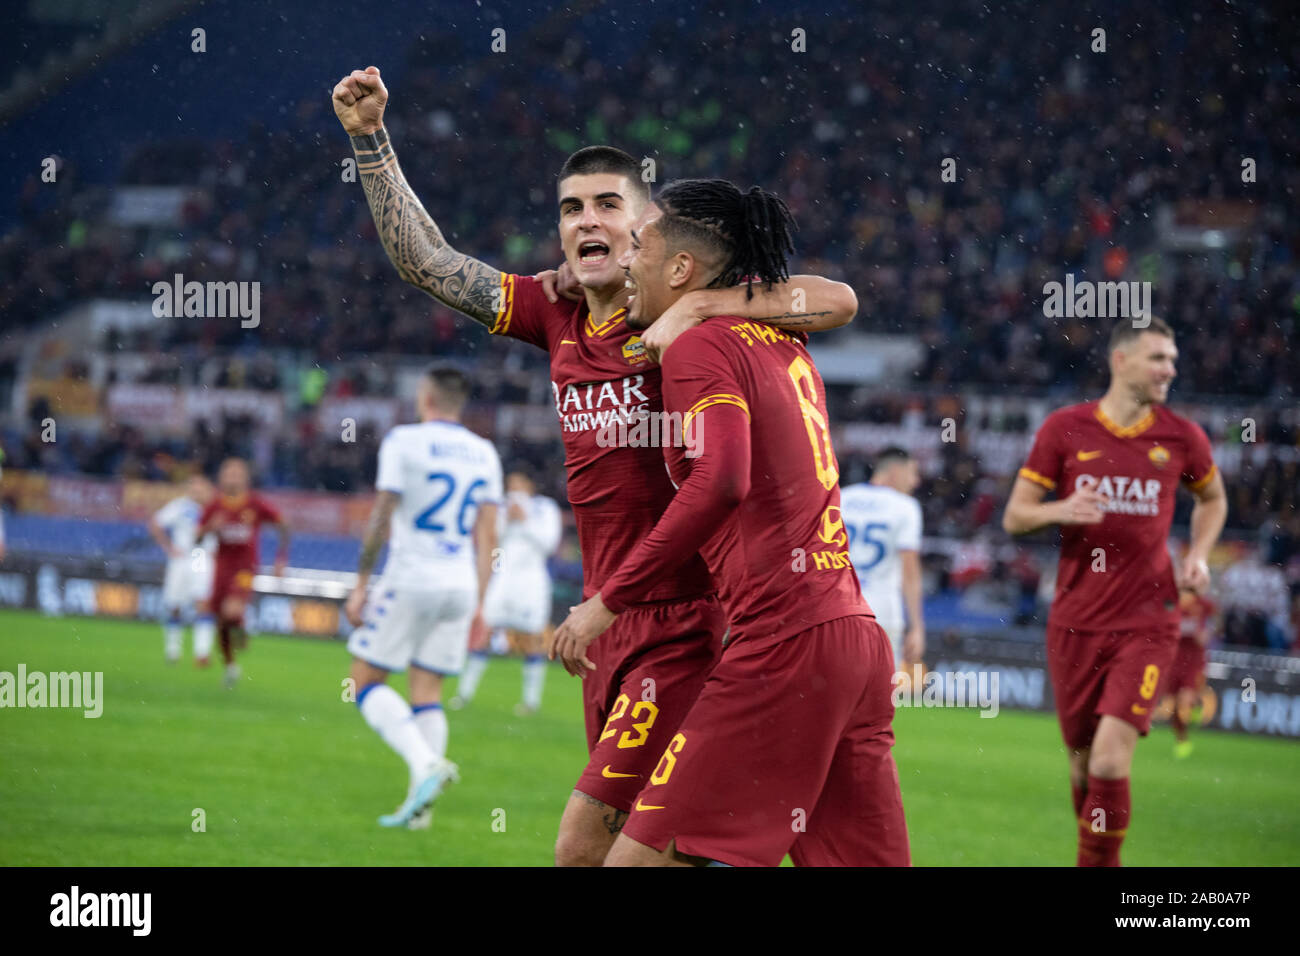 Gianluca Mancini of AS Roma celebrate a goal during the Italian Serie A football match between AS Roma and Brescia at the Olympic Stadium in Rome.(Final score; AS Roma 3:0 Brescia) Stock Photo